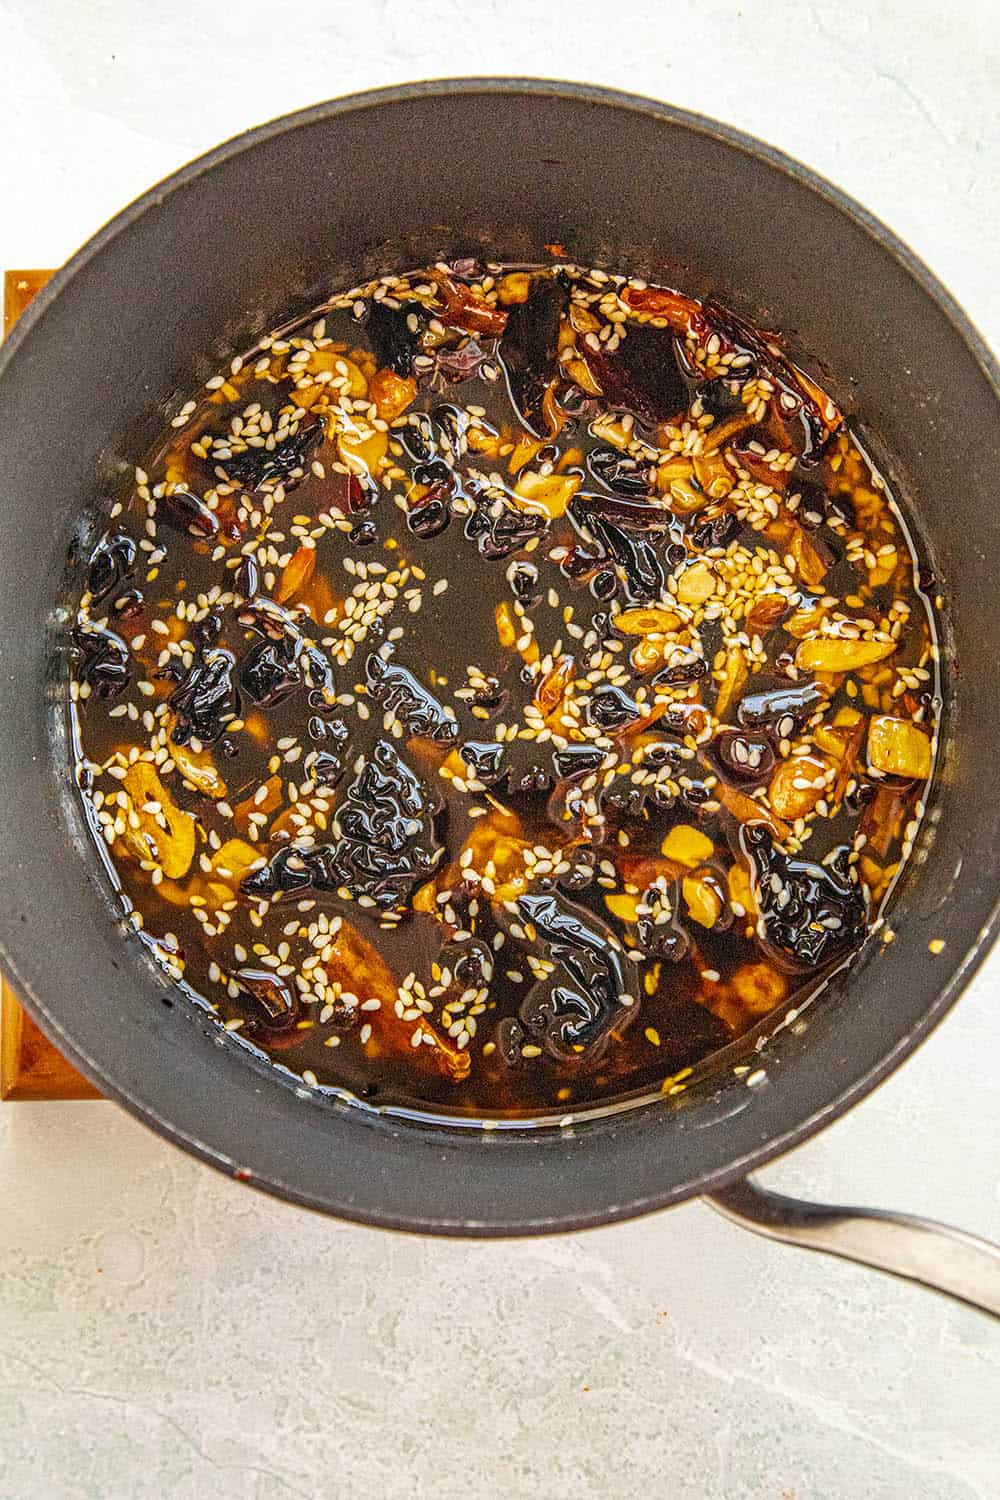 Cooking down the chili peppers in the hot oil with the sesame seeds, nuts and garlic